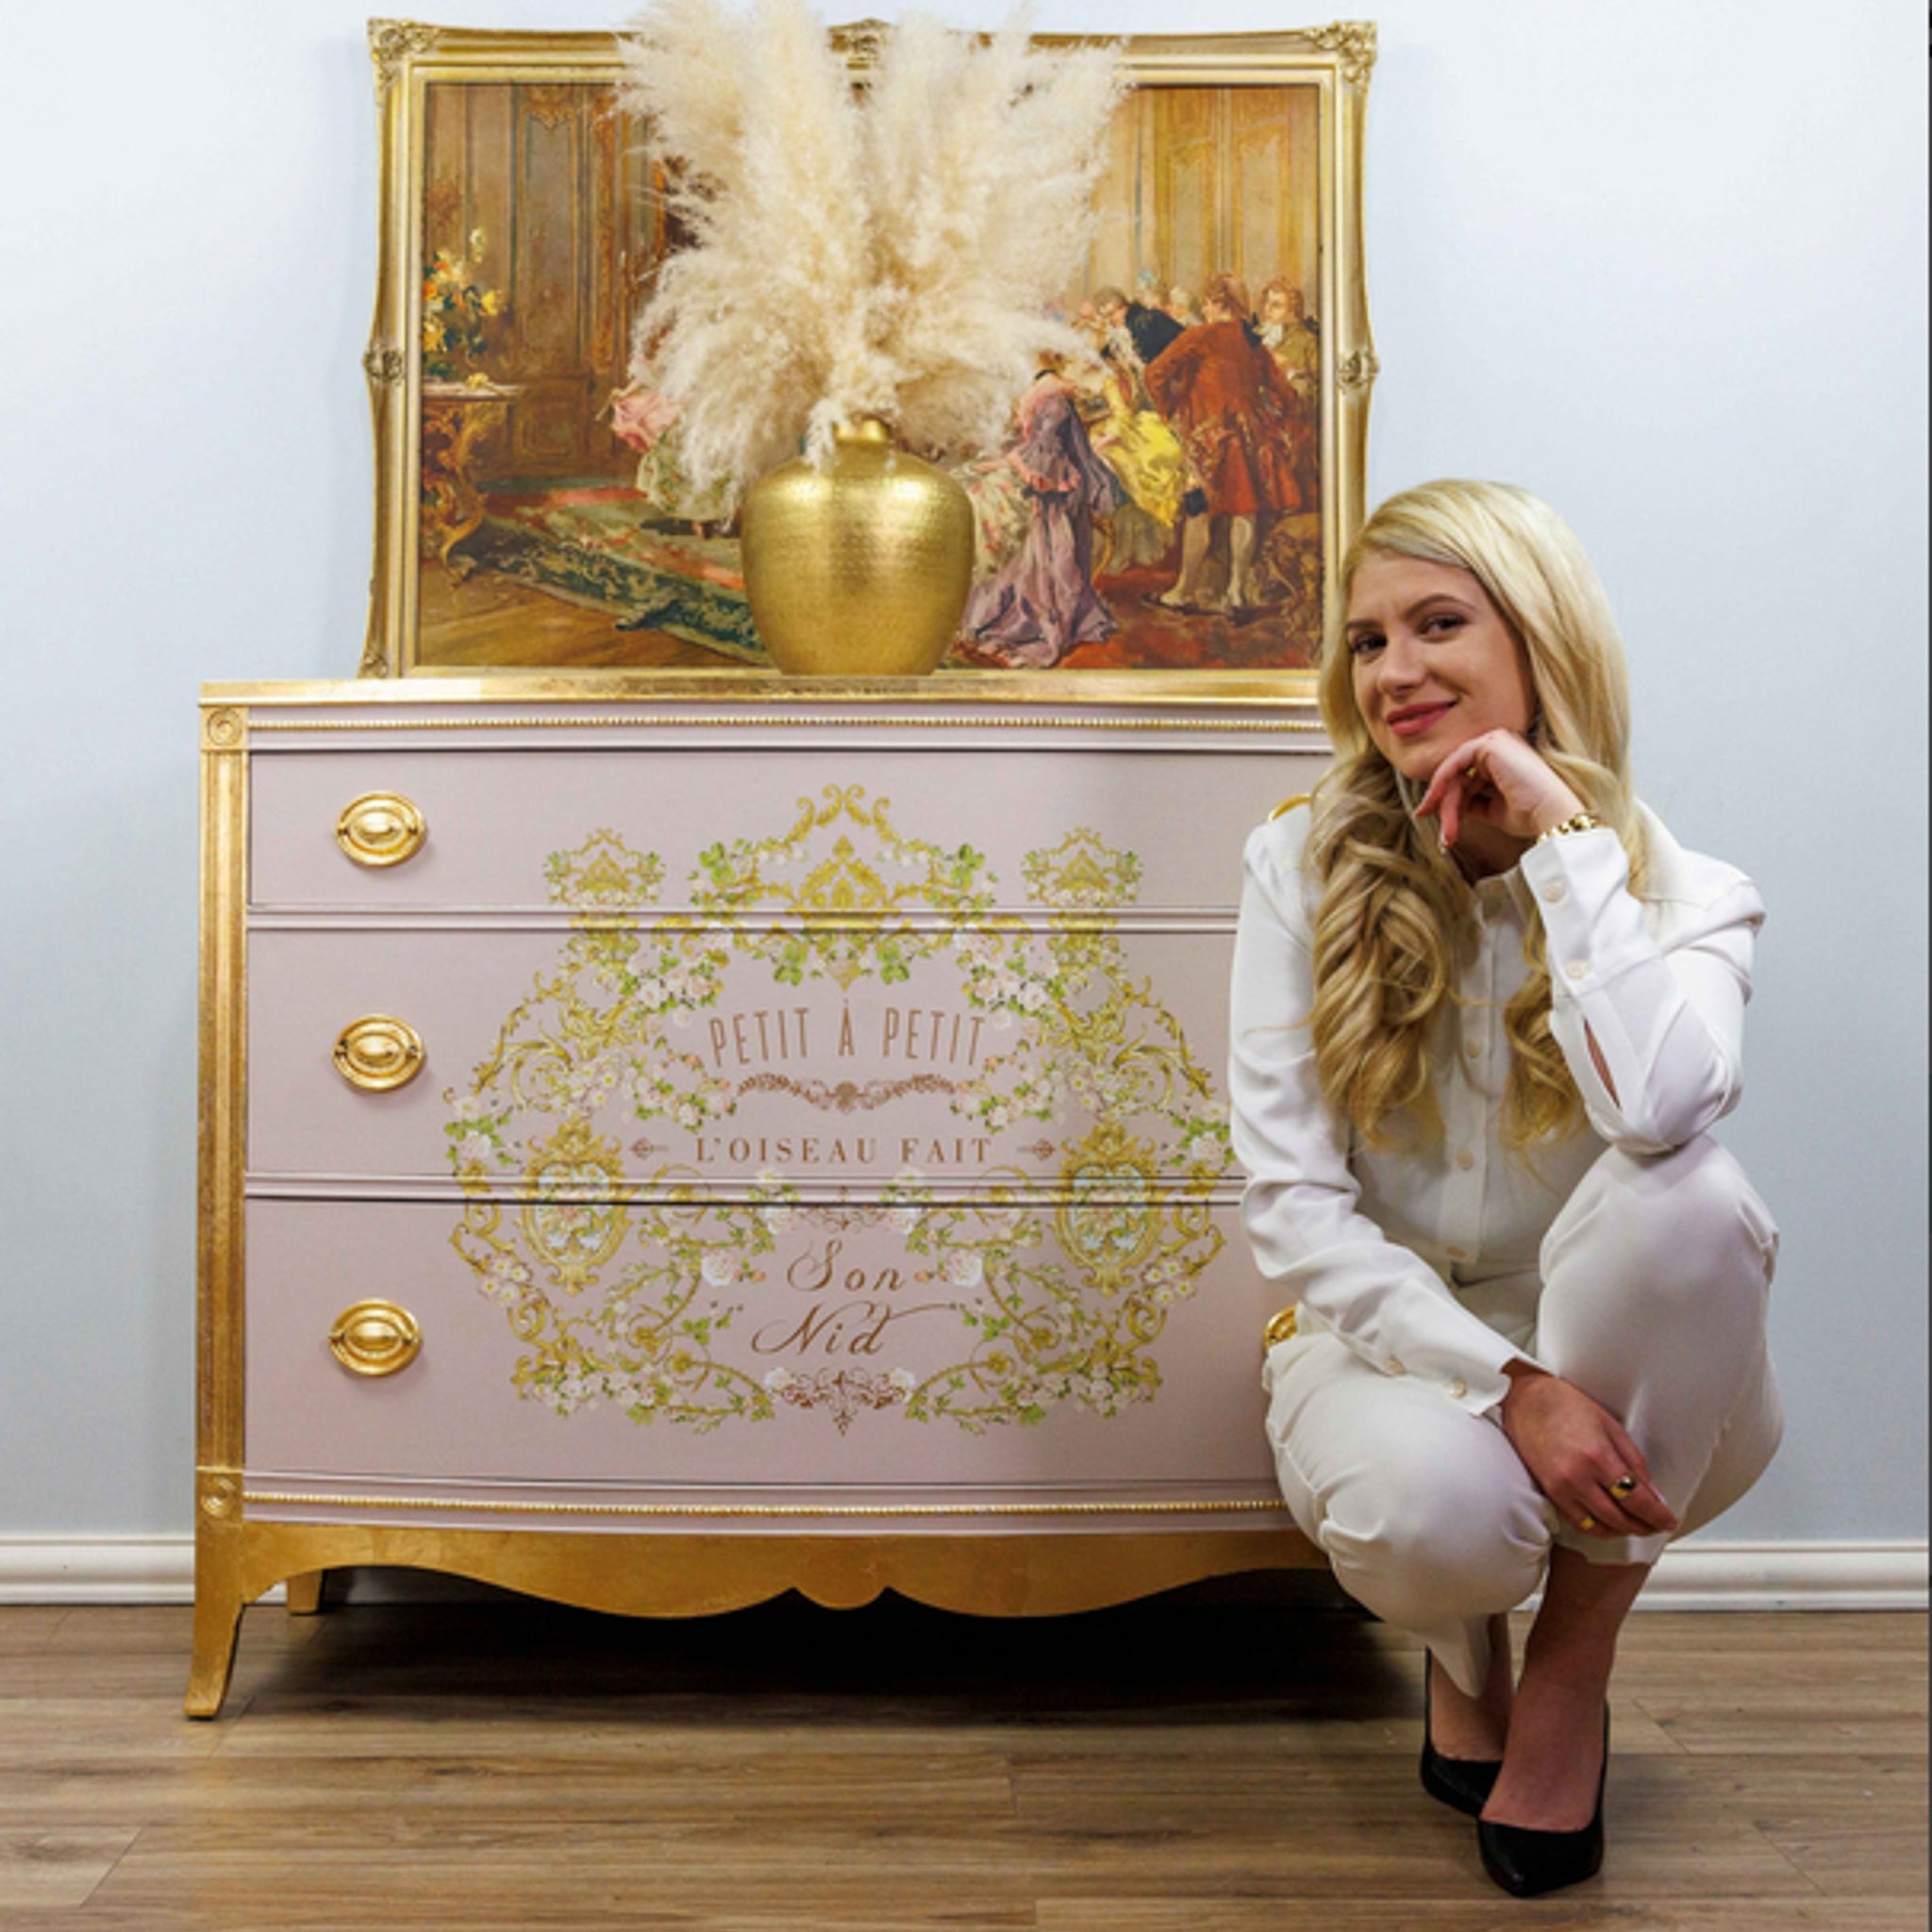 A vintage 3-drawer dresser is painted a soft pink with gold accents and features the Kacha Petite A Petite transfer on its drawers. The designer Kacha is knelt down in front of of the right side of the dresser.